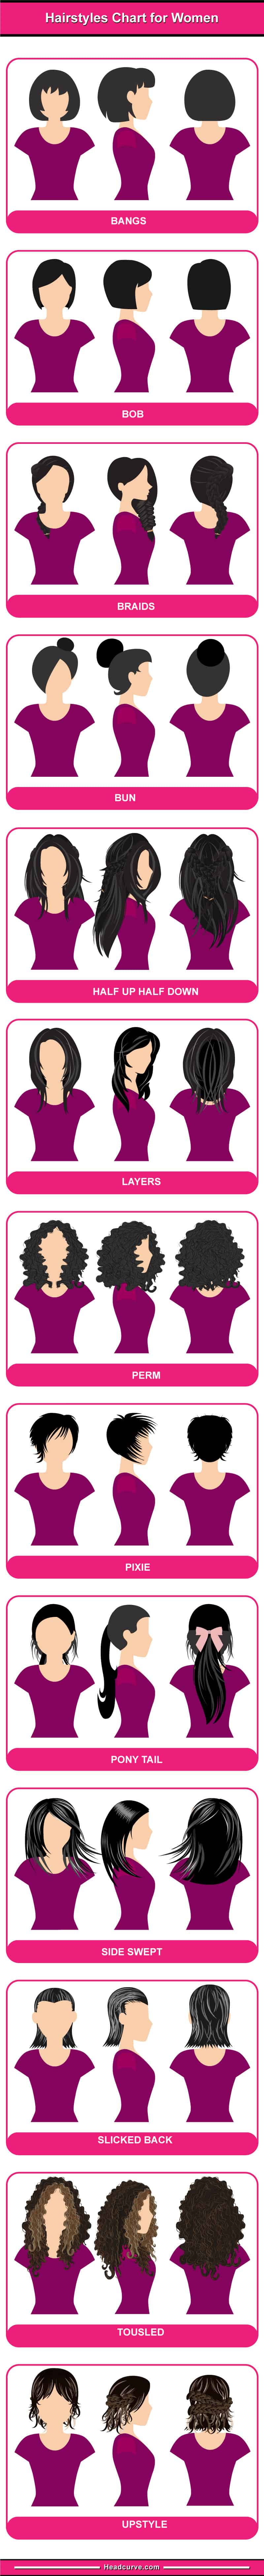 23 Types of Women's Hairstyles - Do You Know them All?